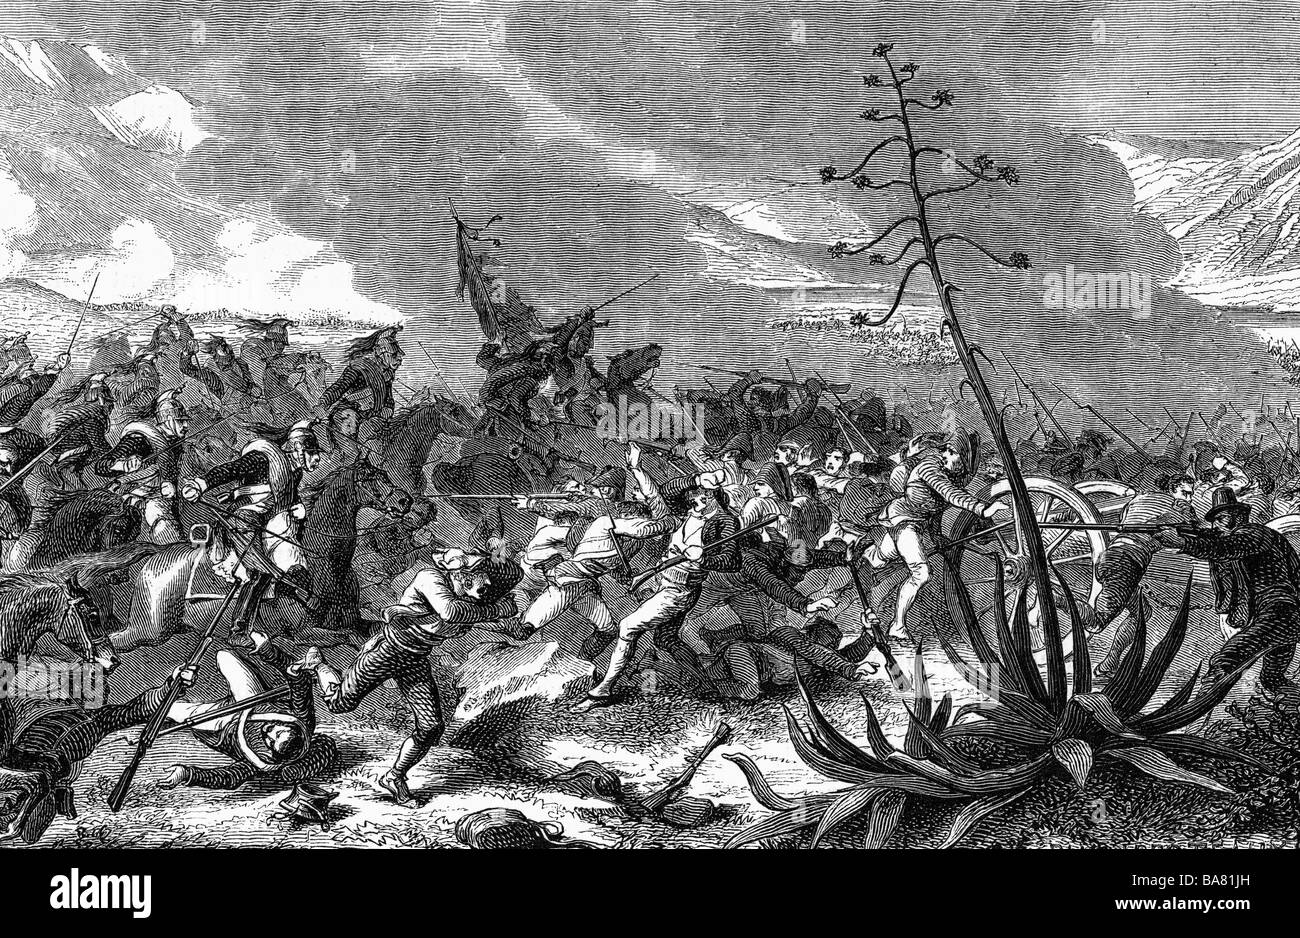 events, Peninsula War 1808 - 1814, Battle of Medellin, 28.3.1809, charge of French cavalry, wood engraving, 19th century, soldiers, military, Spanish, cuirassiers, Napoleonic Wars, historic, historical, people, Stock Photo